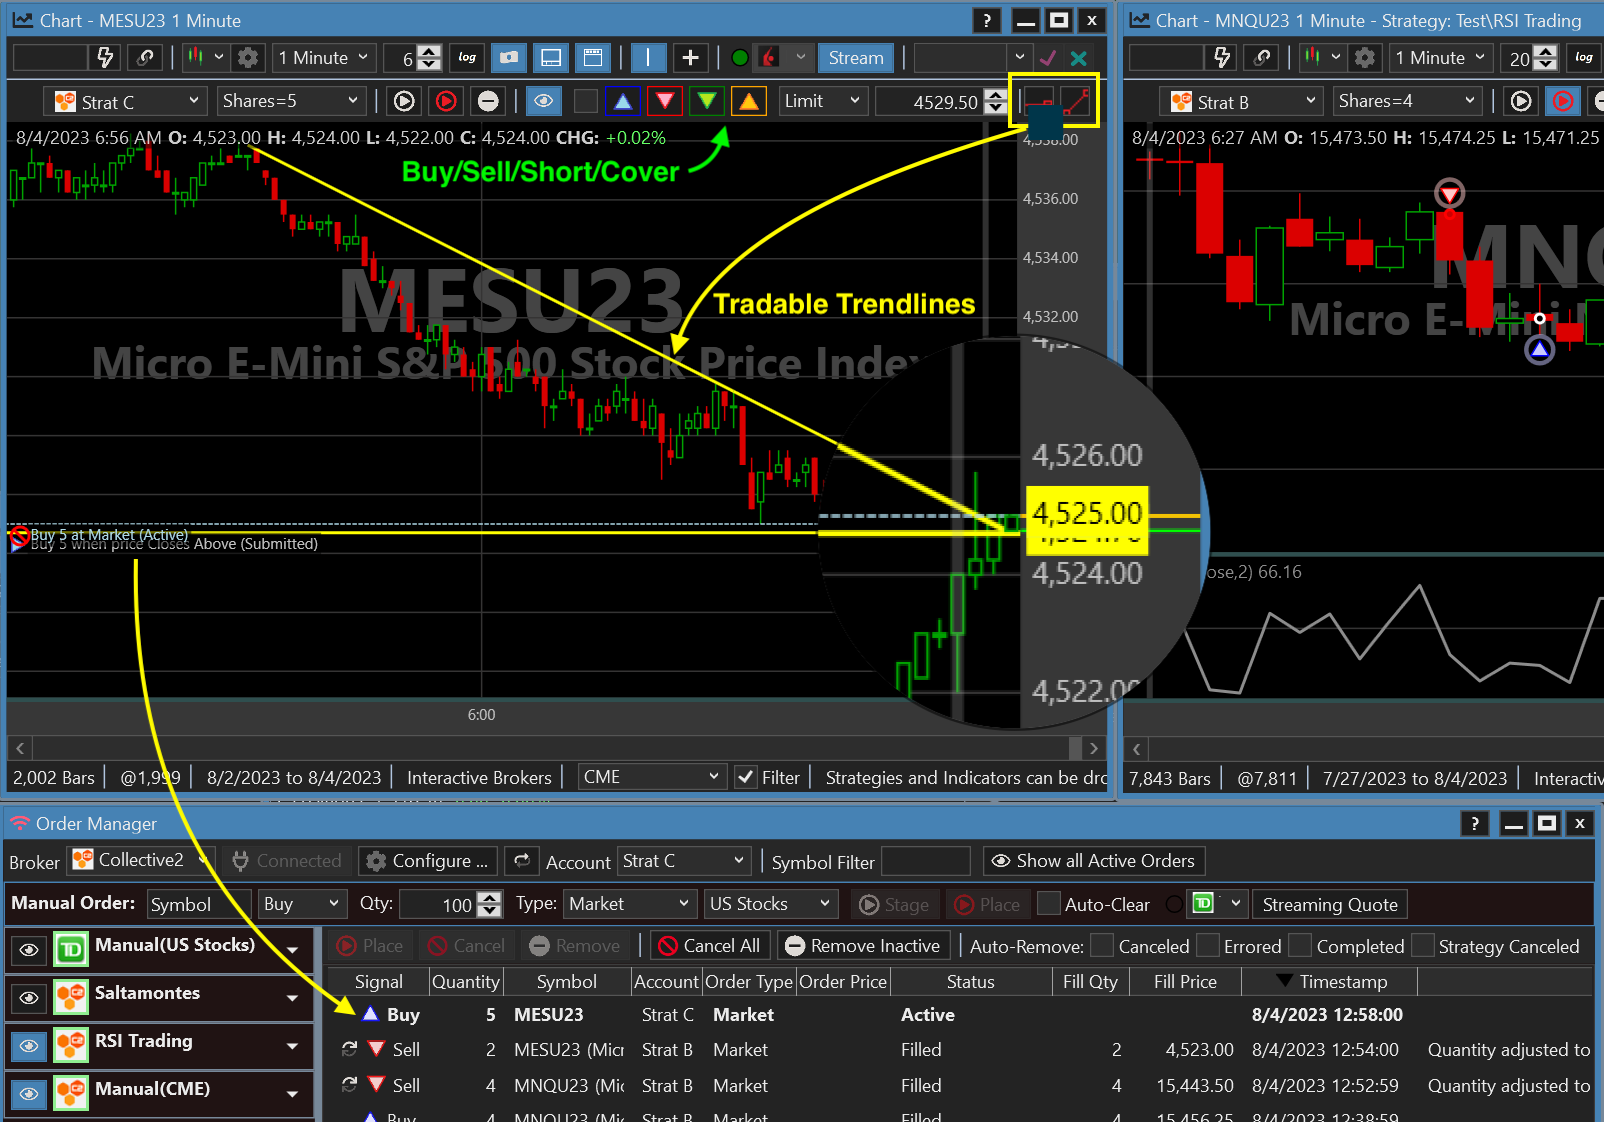 Visual and discretionary traders can trade at C2 with streaming chart Trade buttons or Tradable Trendlines